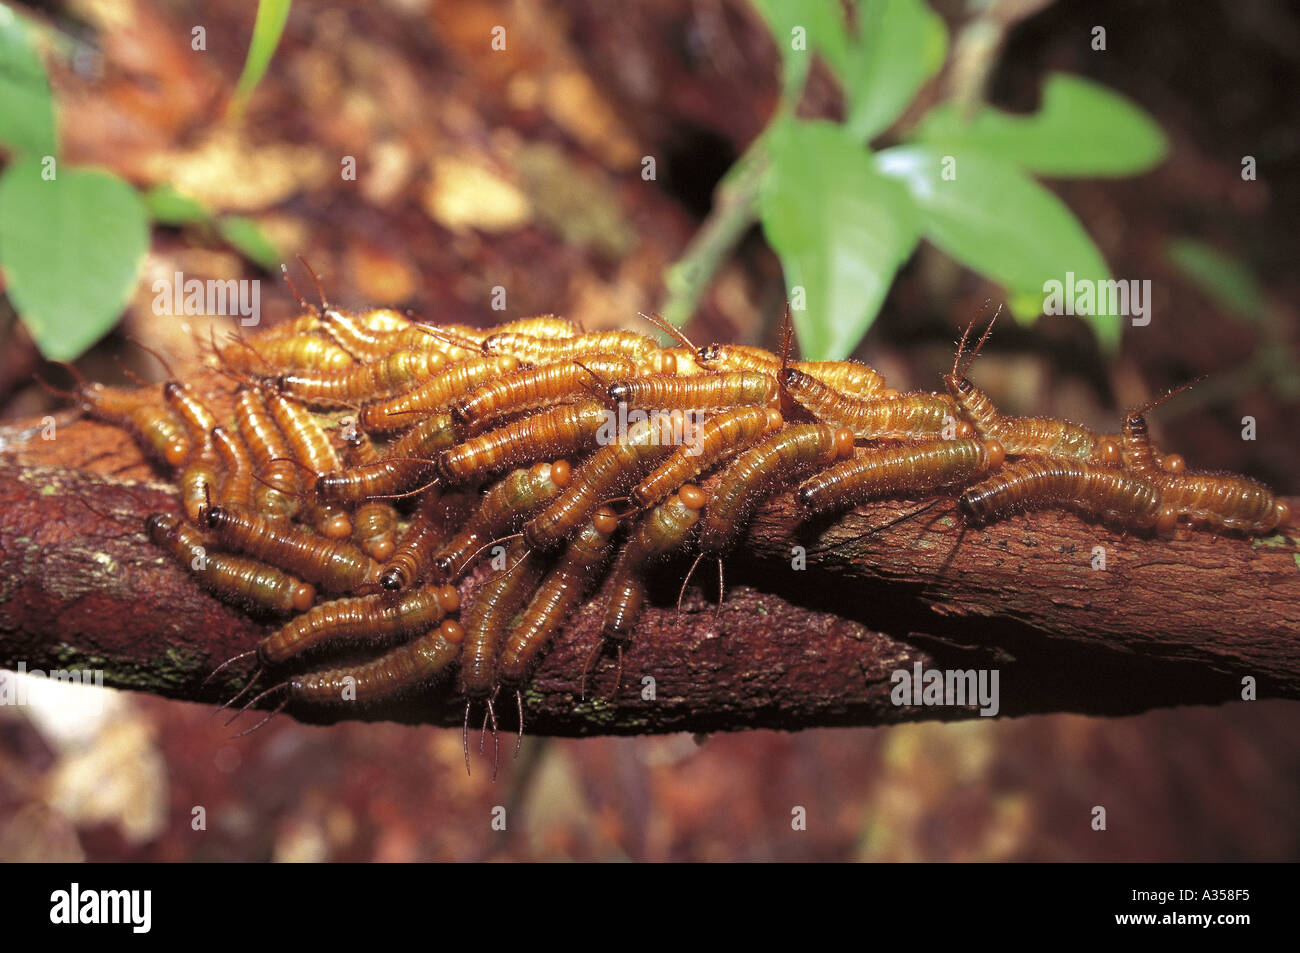 Amazon rainforest Ariau Rio Negro Brazil Small tree infested with colony of centipede like insects Stock Photo